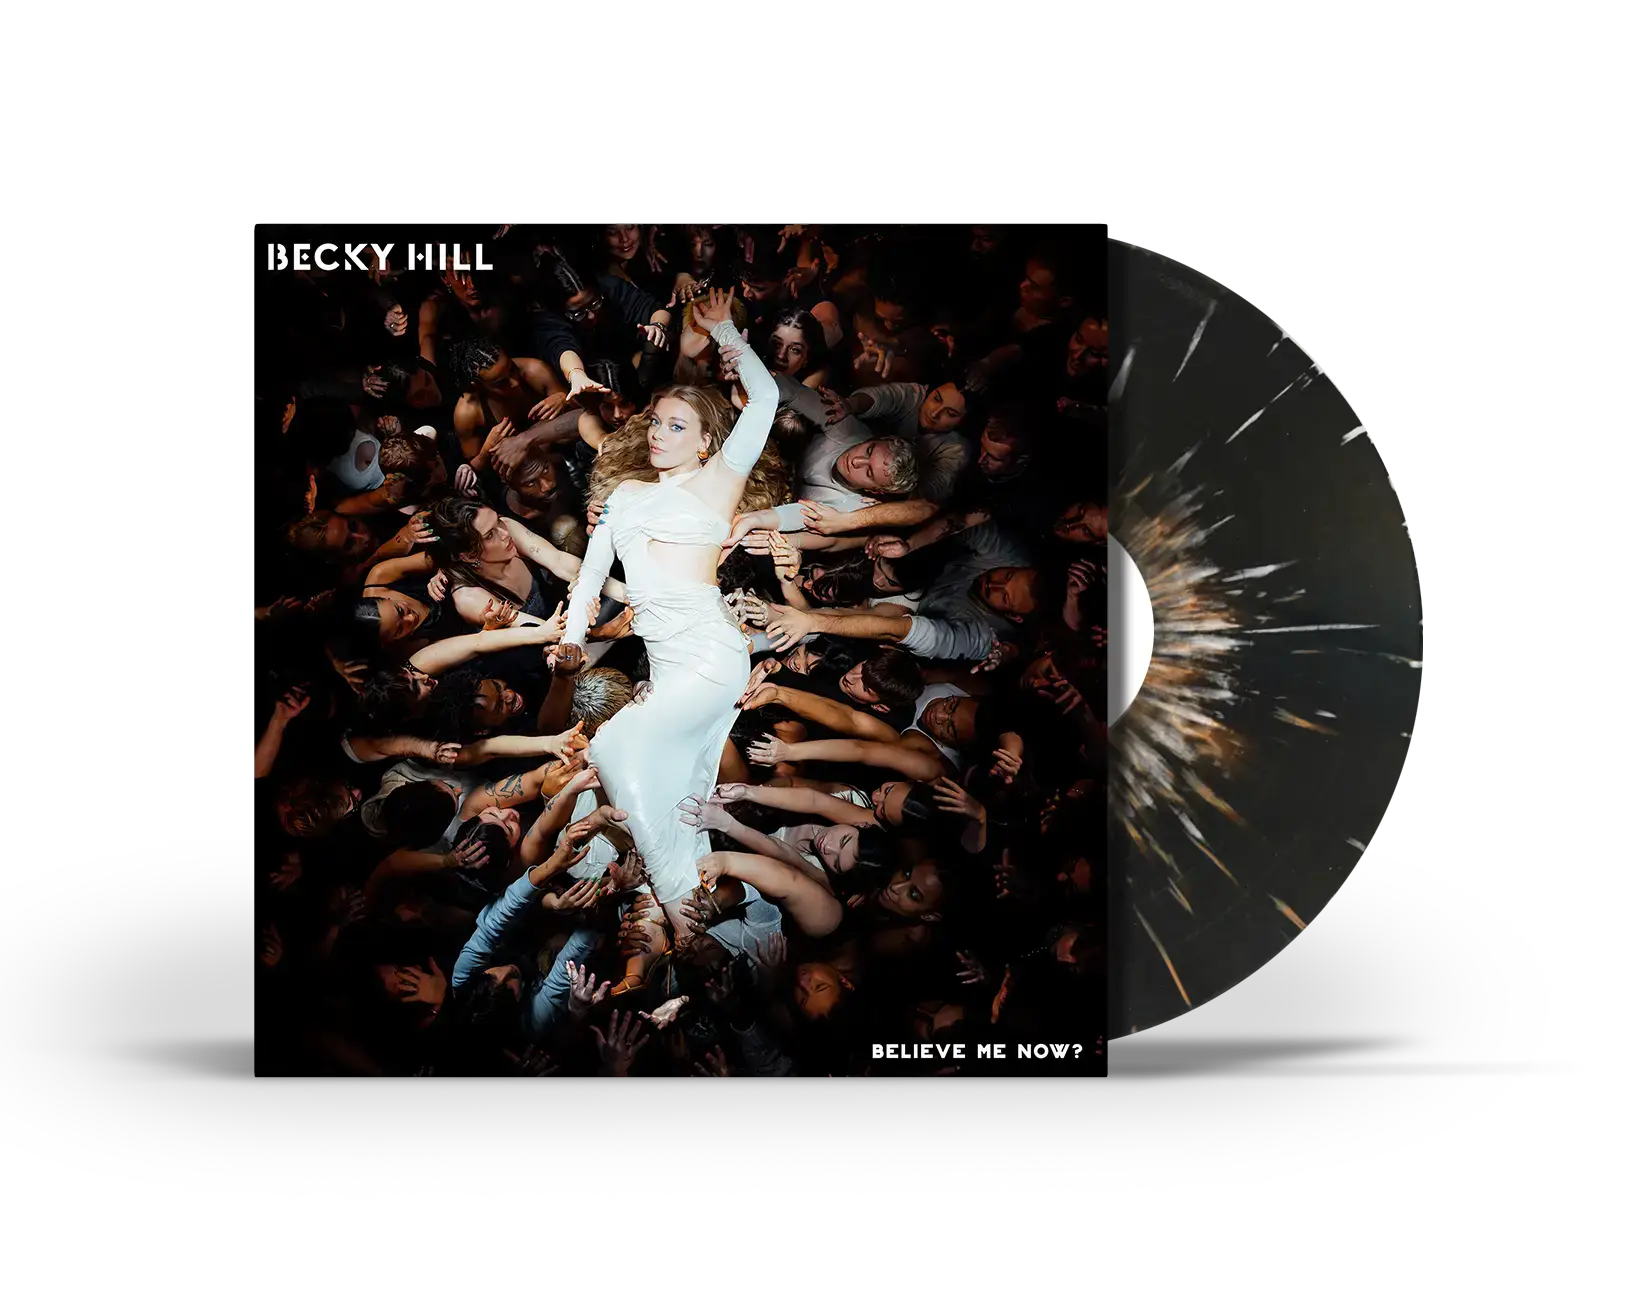 Album artwork for Believe Me Now? by Becky Hill